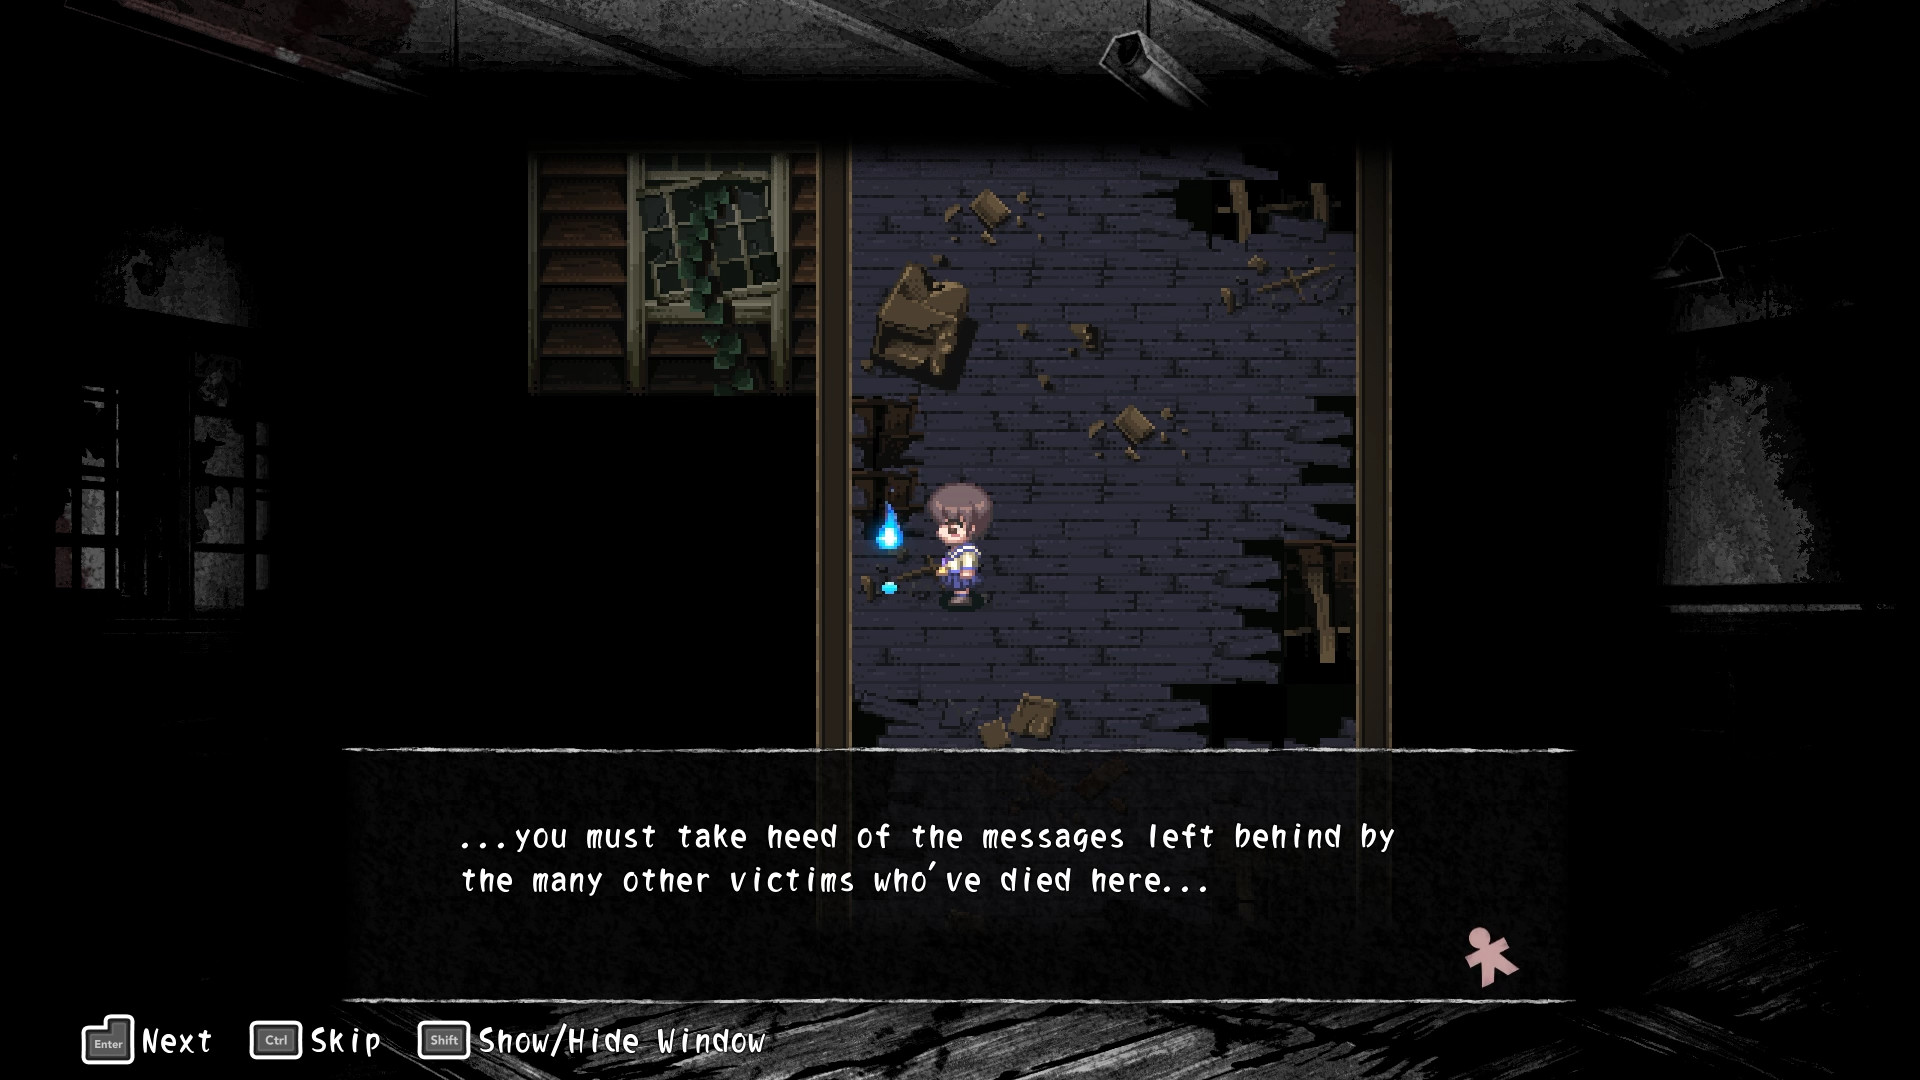 Best JRPGs - In Corpse Party, the player is urged to "take heed of the messages left behind by the many other victims who've died here."